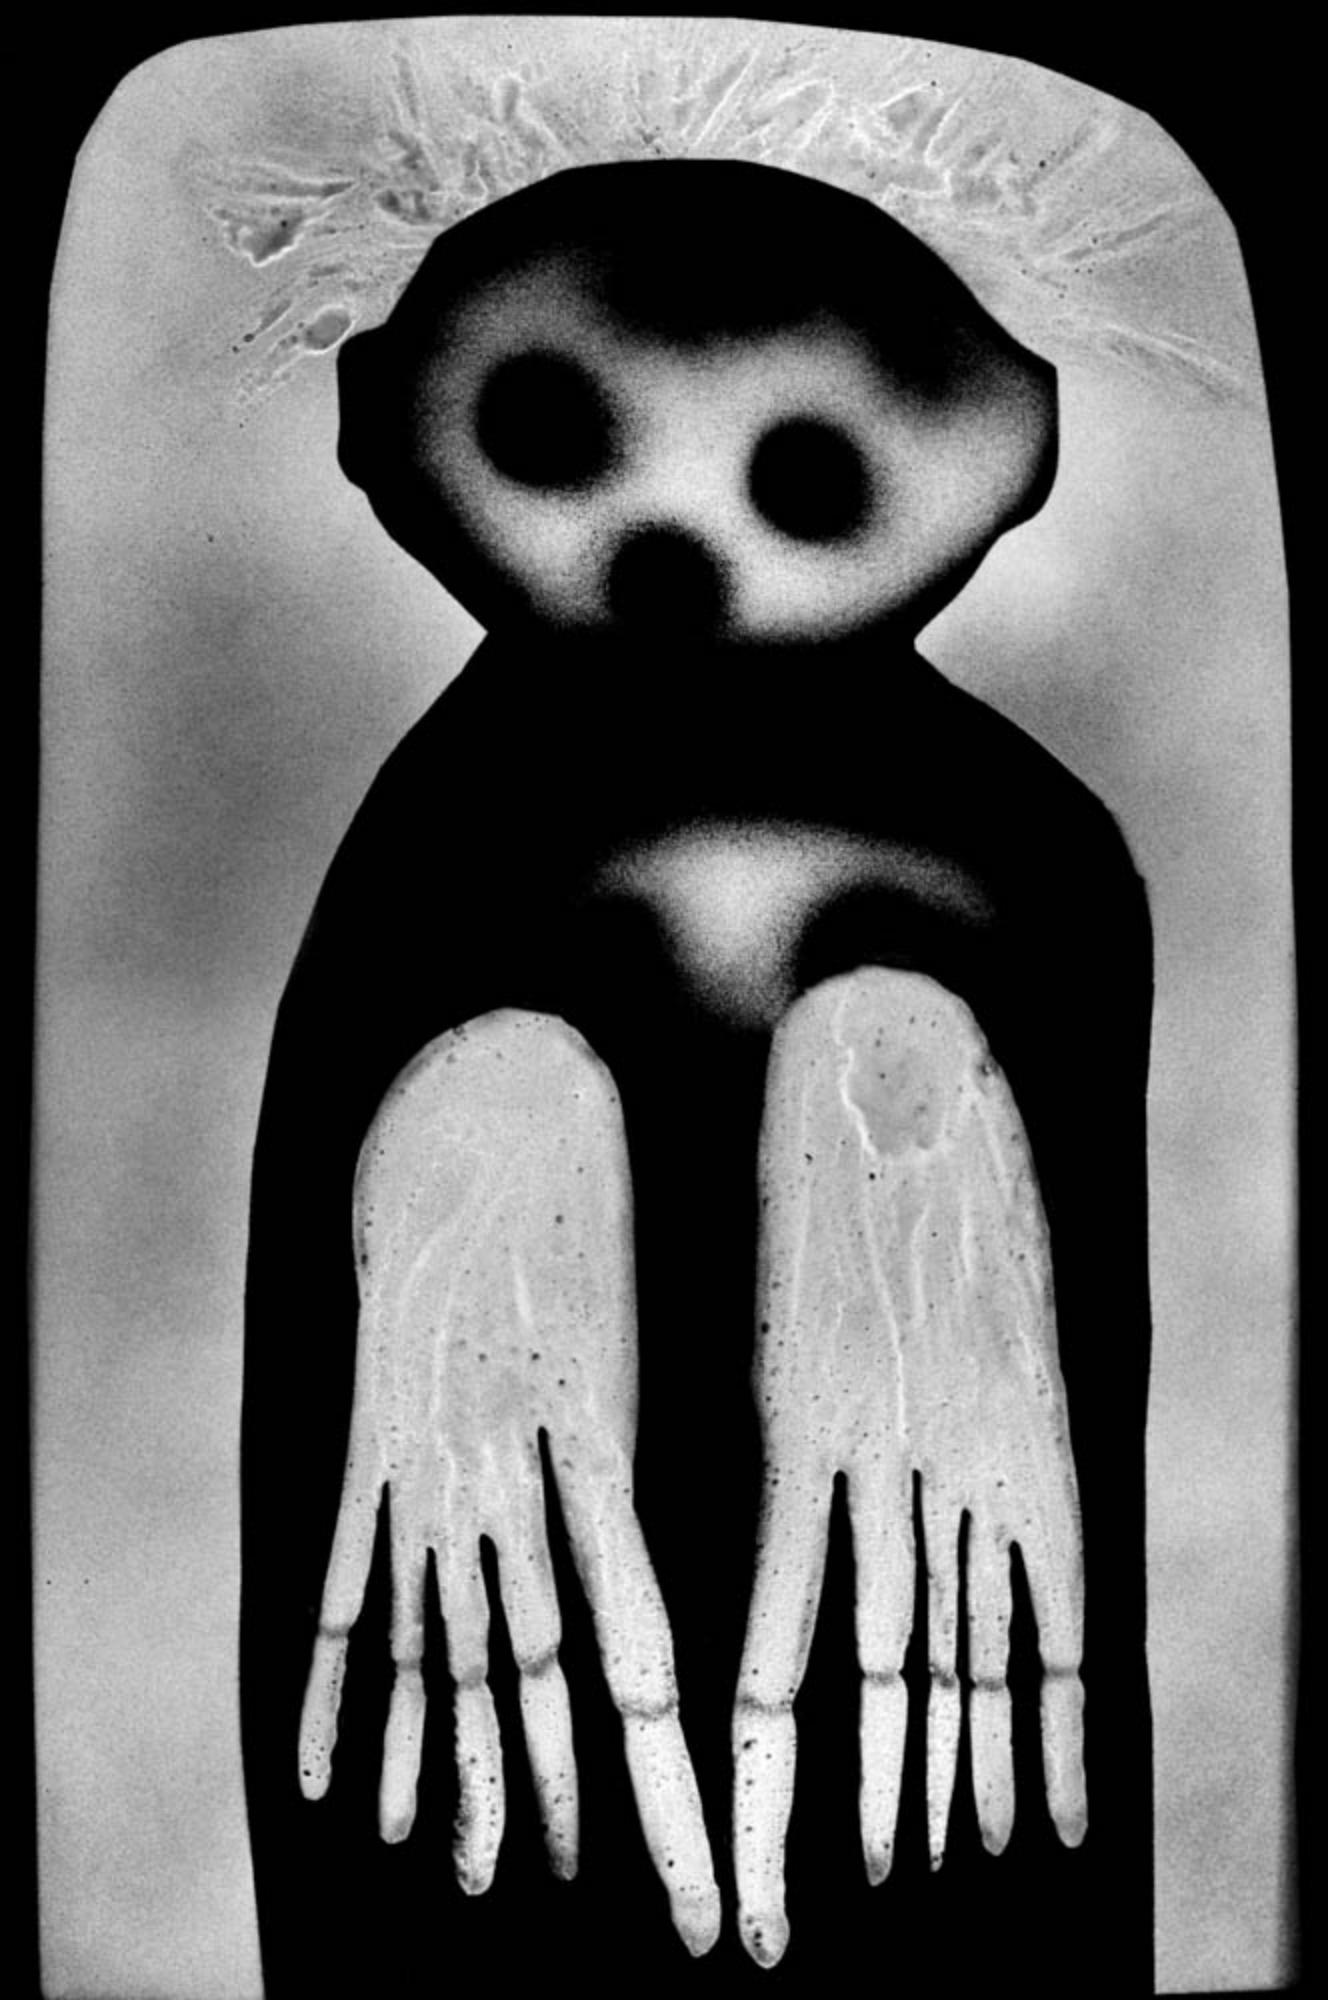 Roger Ballen
Waif, from the series 'The Theatre of Apparitions', 2012
One sided Texflex Lightbox, Powder coated Ferro Black
Lightbox 100 x 86 x 9 cm (39 3/8 x 33 7/8 x 3 1/2 in.)
Edition of 3 (#1/3)

All lightboxes can also be purchased as a